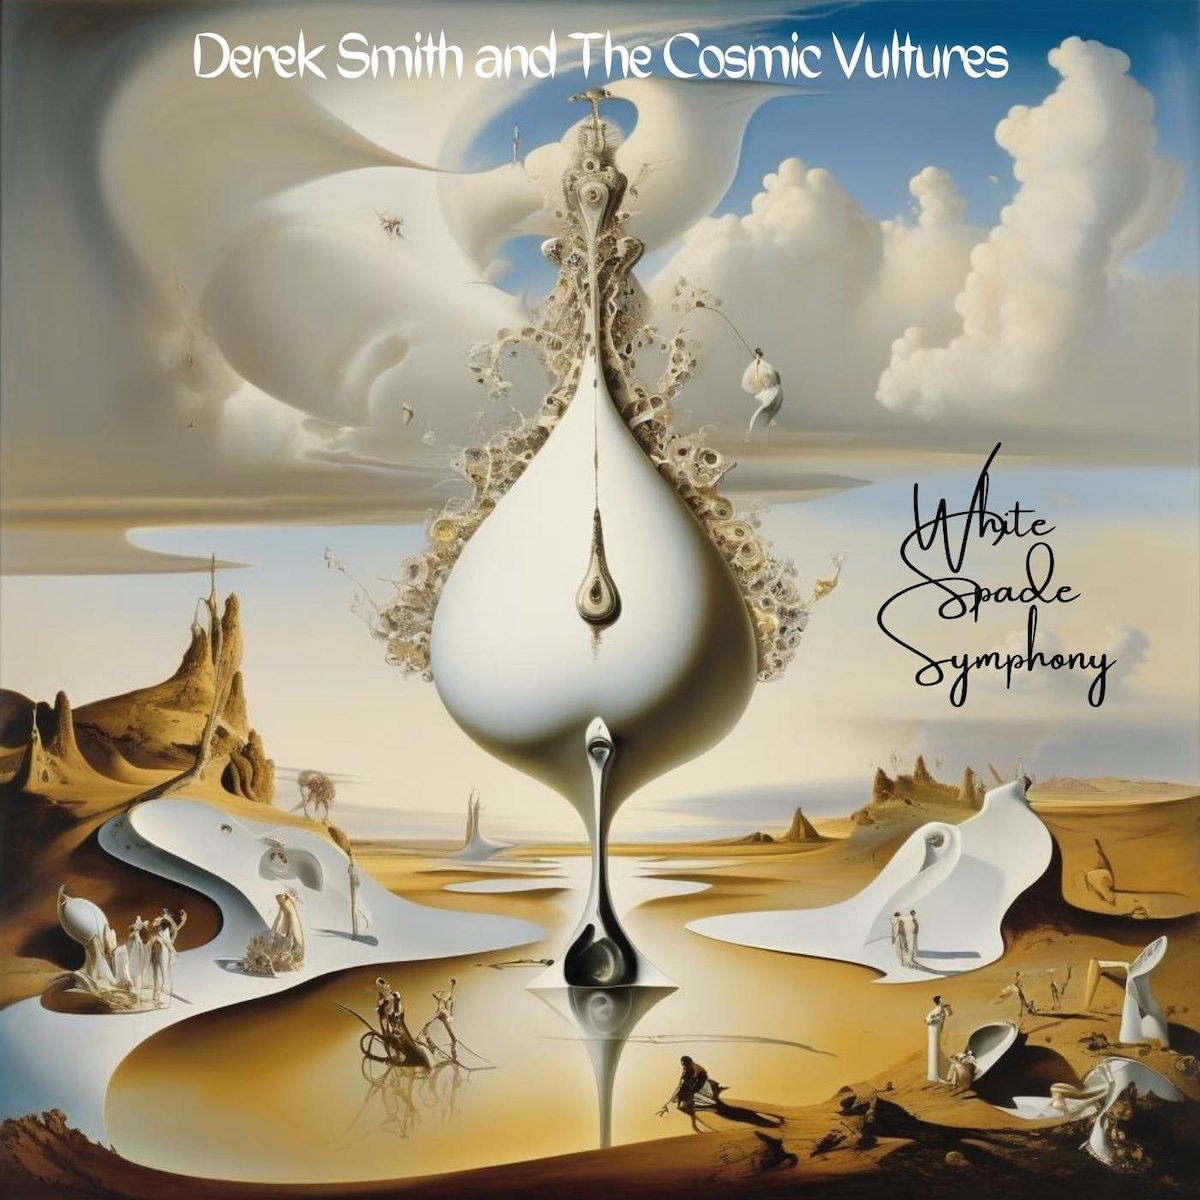 MM Radio bringing you 100% pure eargasm with Derek Smith and the Cosmic Vultures - White Spade Symphony 💥 Listen here on mm-radio.com #DerekSmithandtheCosmicVultures @knyvetpr @MikeMatney10